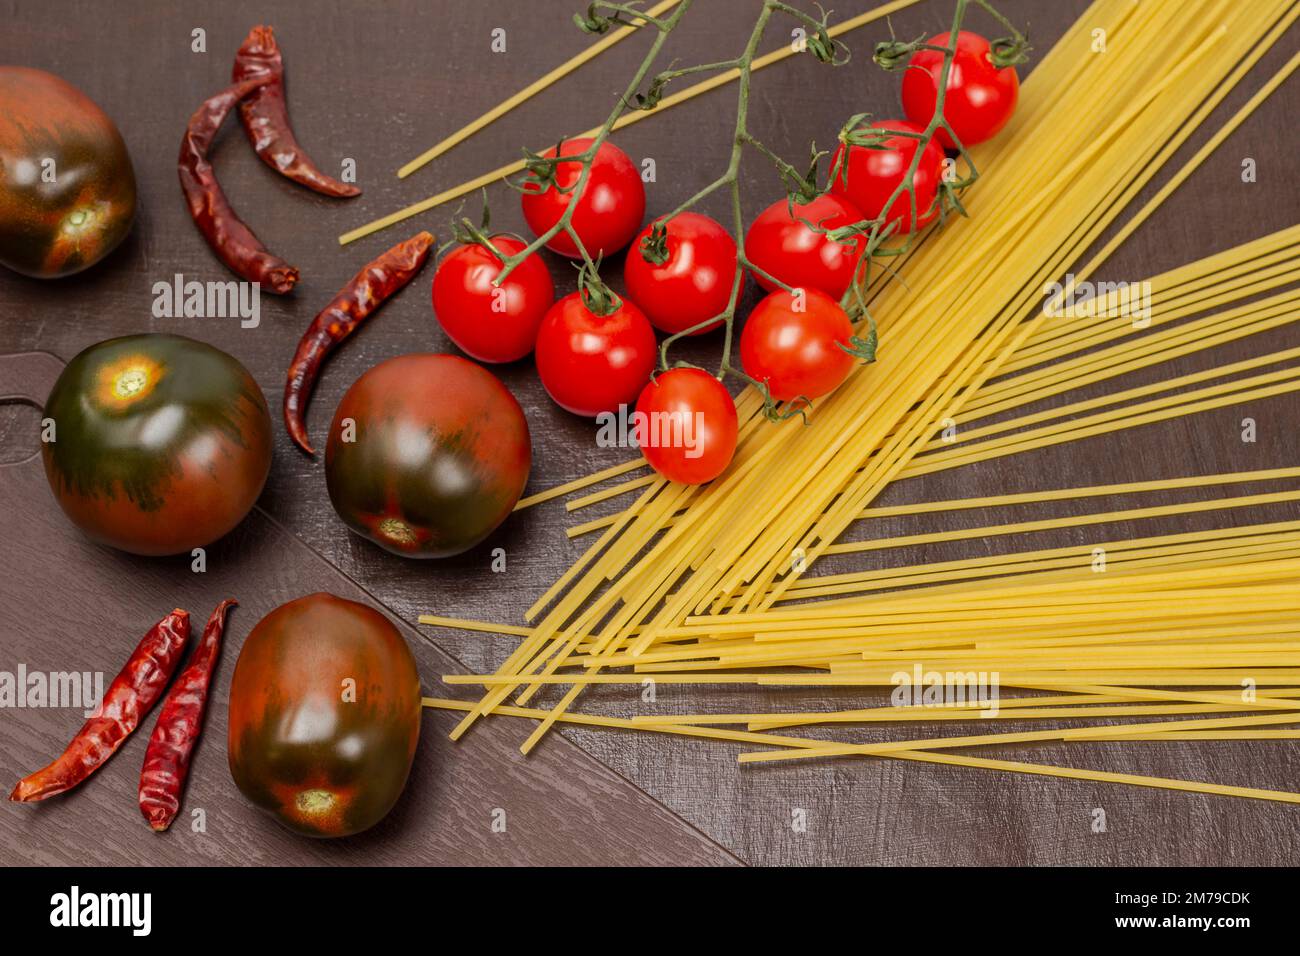 Spaghetti, cherry tomato sprig and whole brown tomatoes. Top view. Brown background. Stock Photo